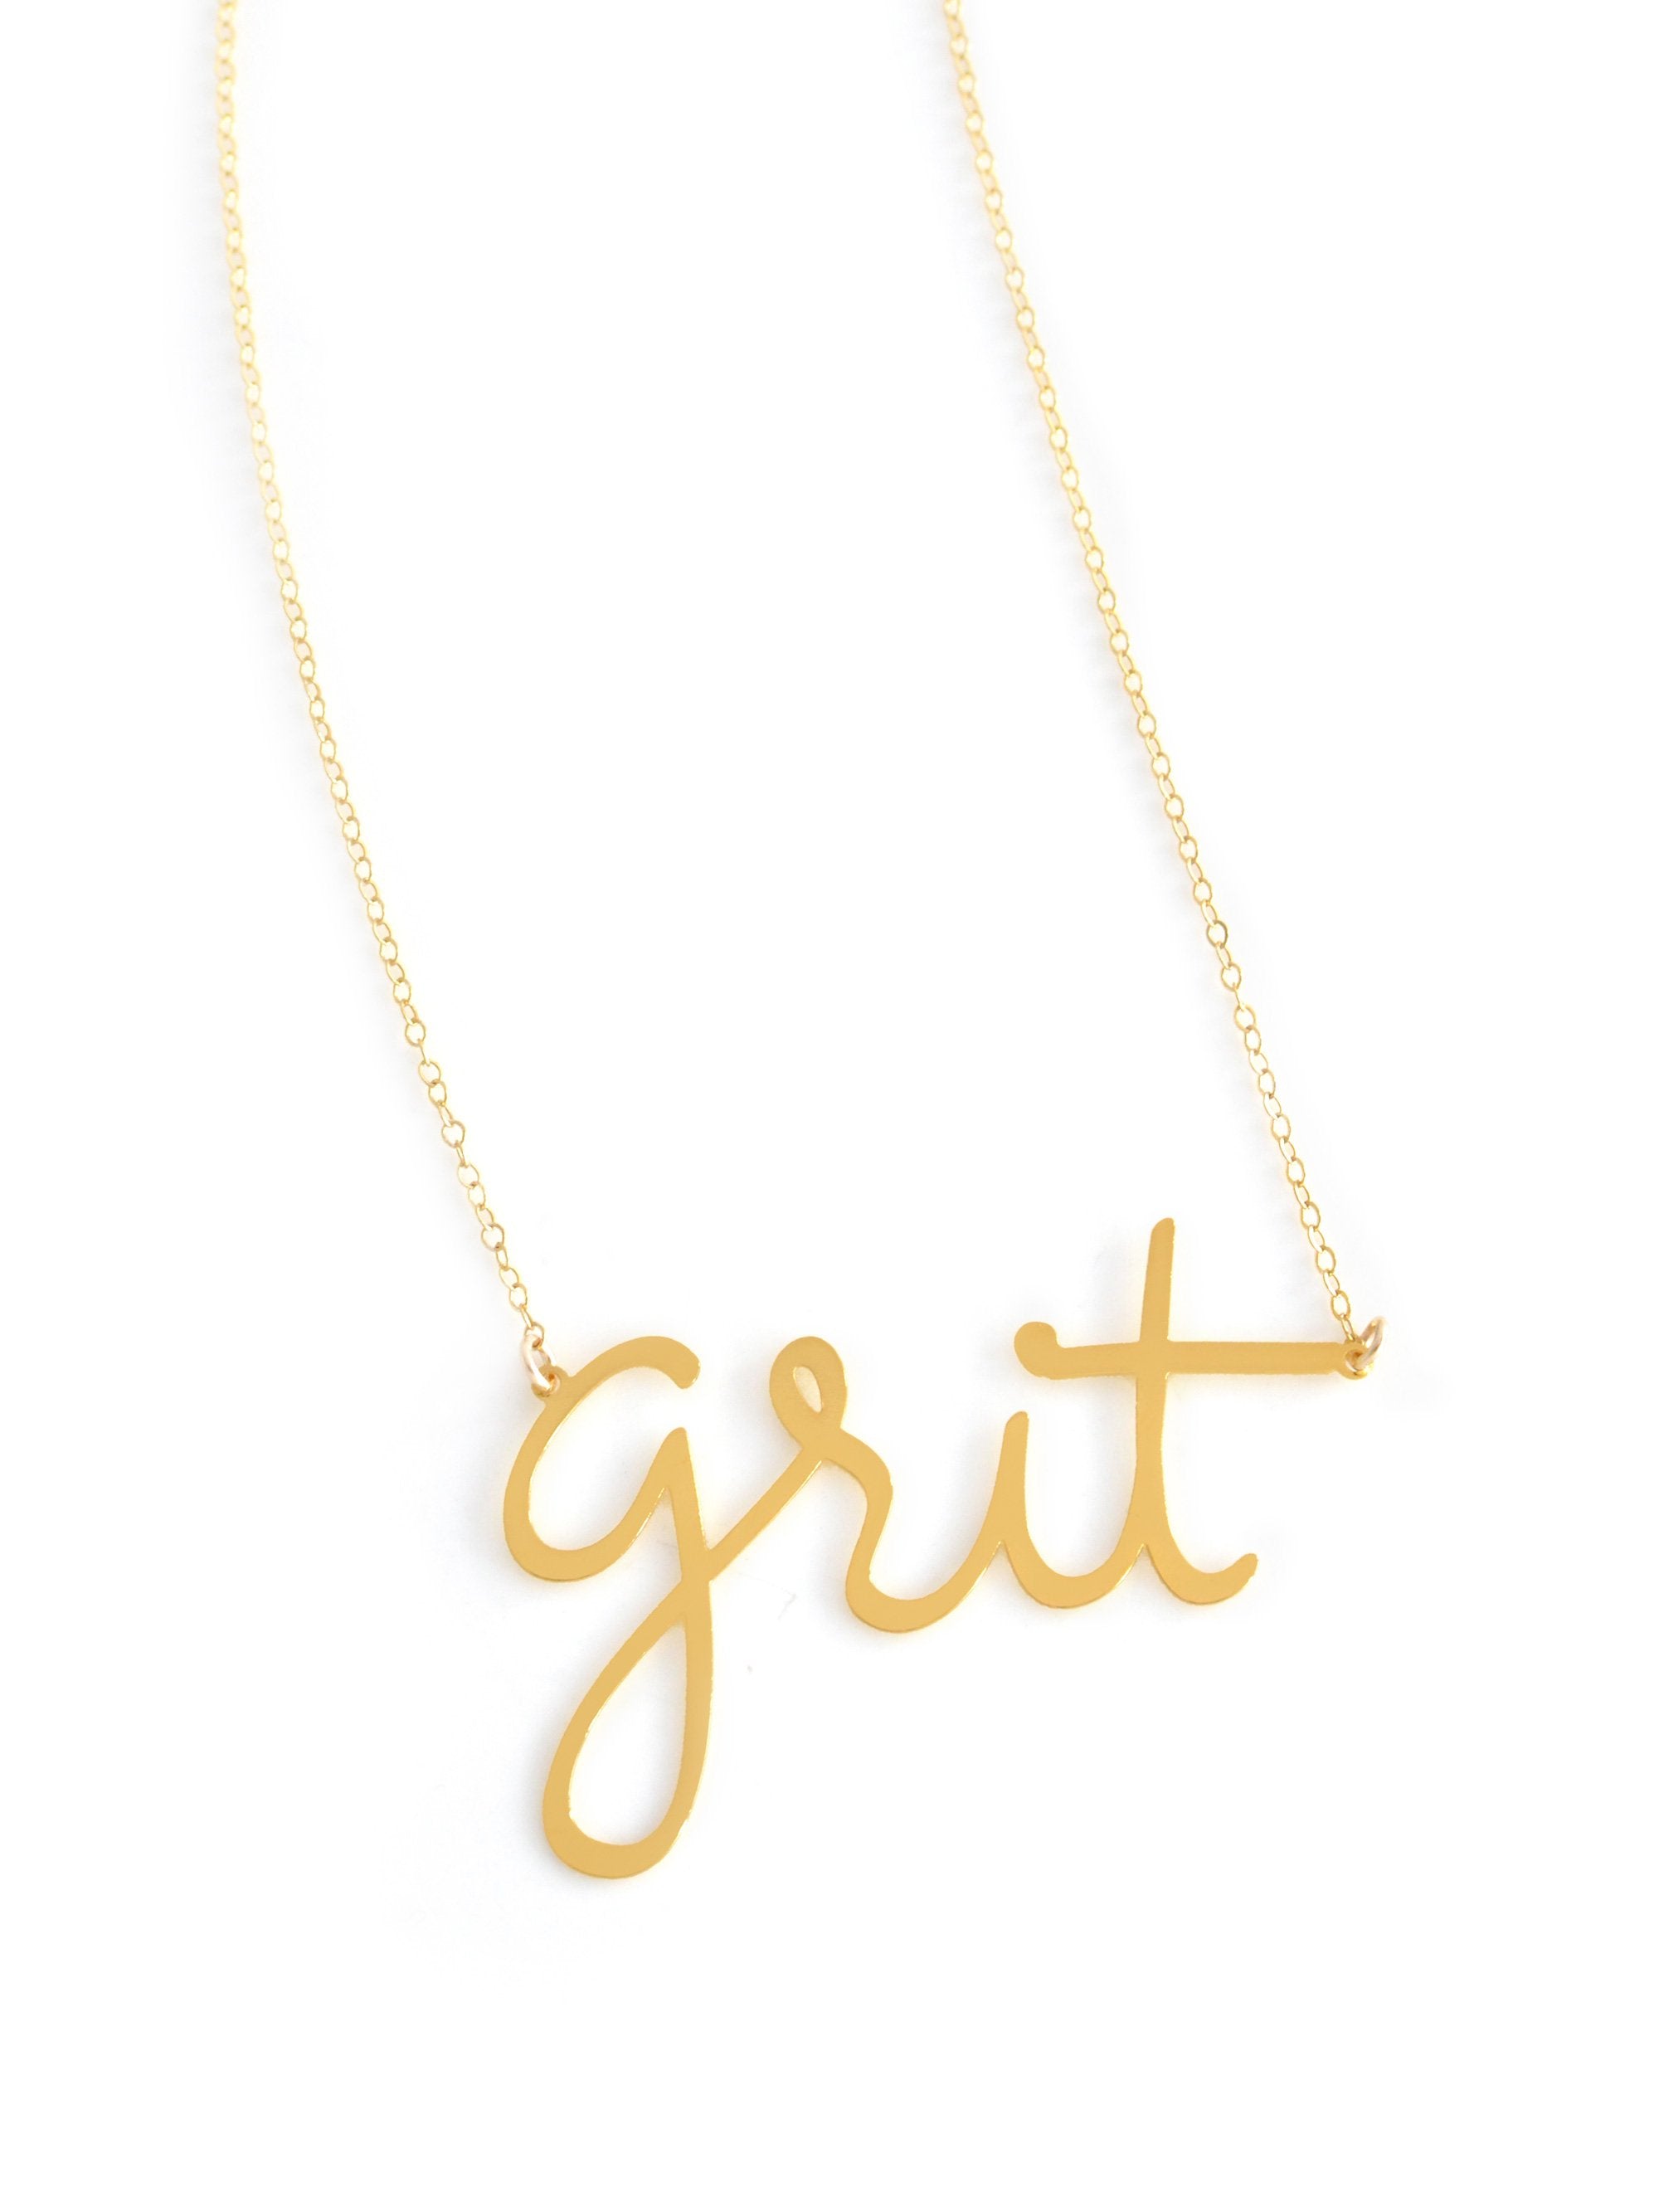 Grit Necklace - High Quality, Affordable, Hand Written, Empowering, Self Love, Mantra Word Necklace - Available in Gold and Silver - Small and Large Sizes - Made in USA - Brevity Jewelry